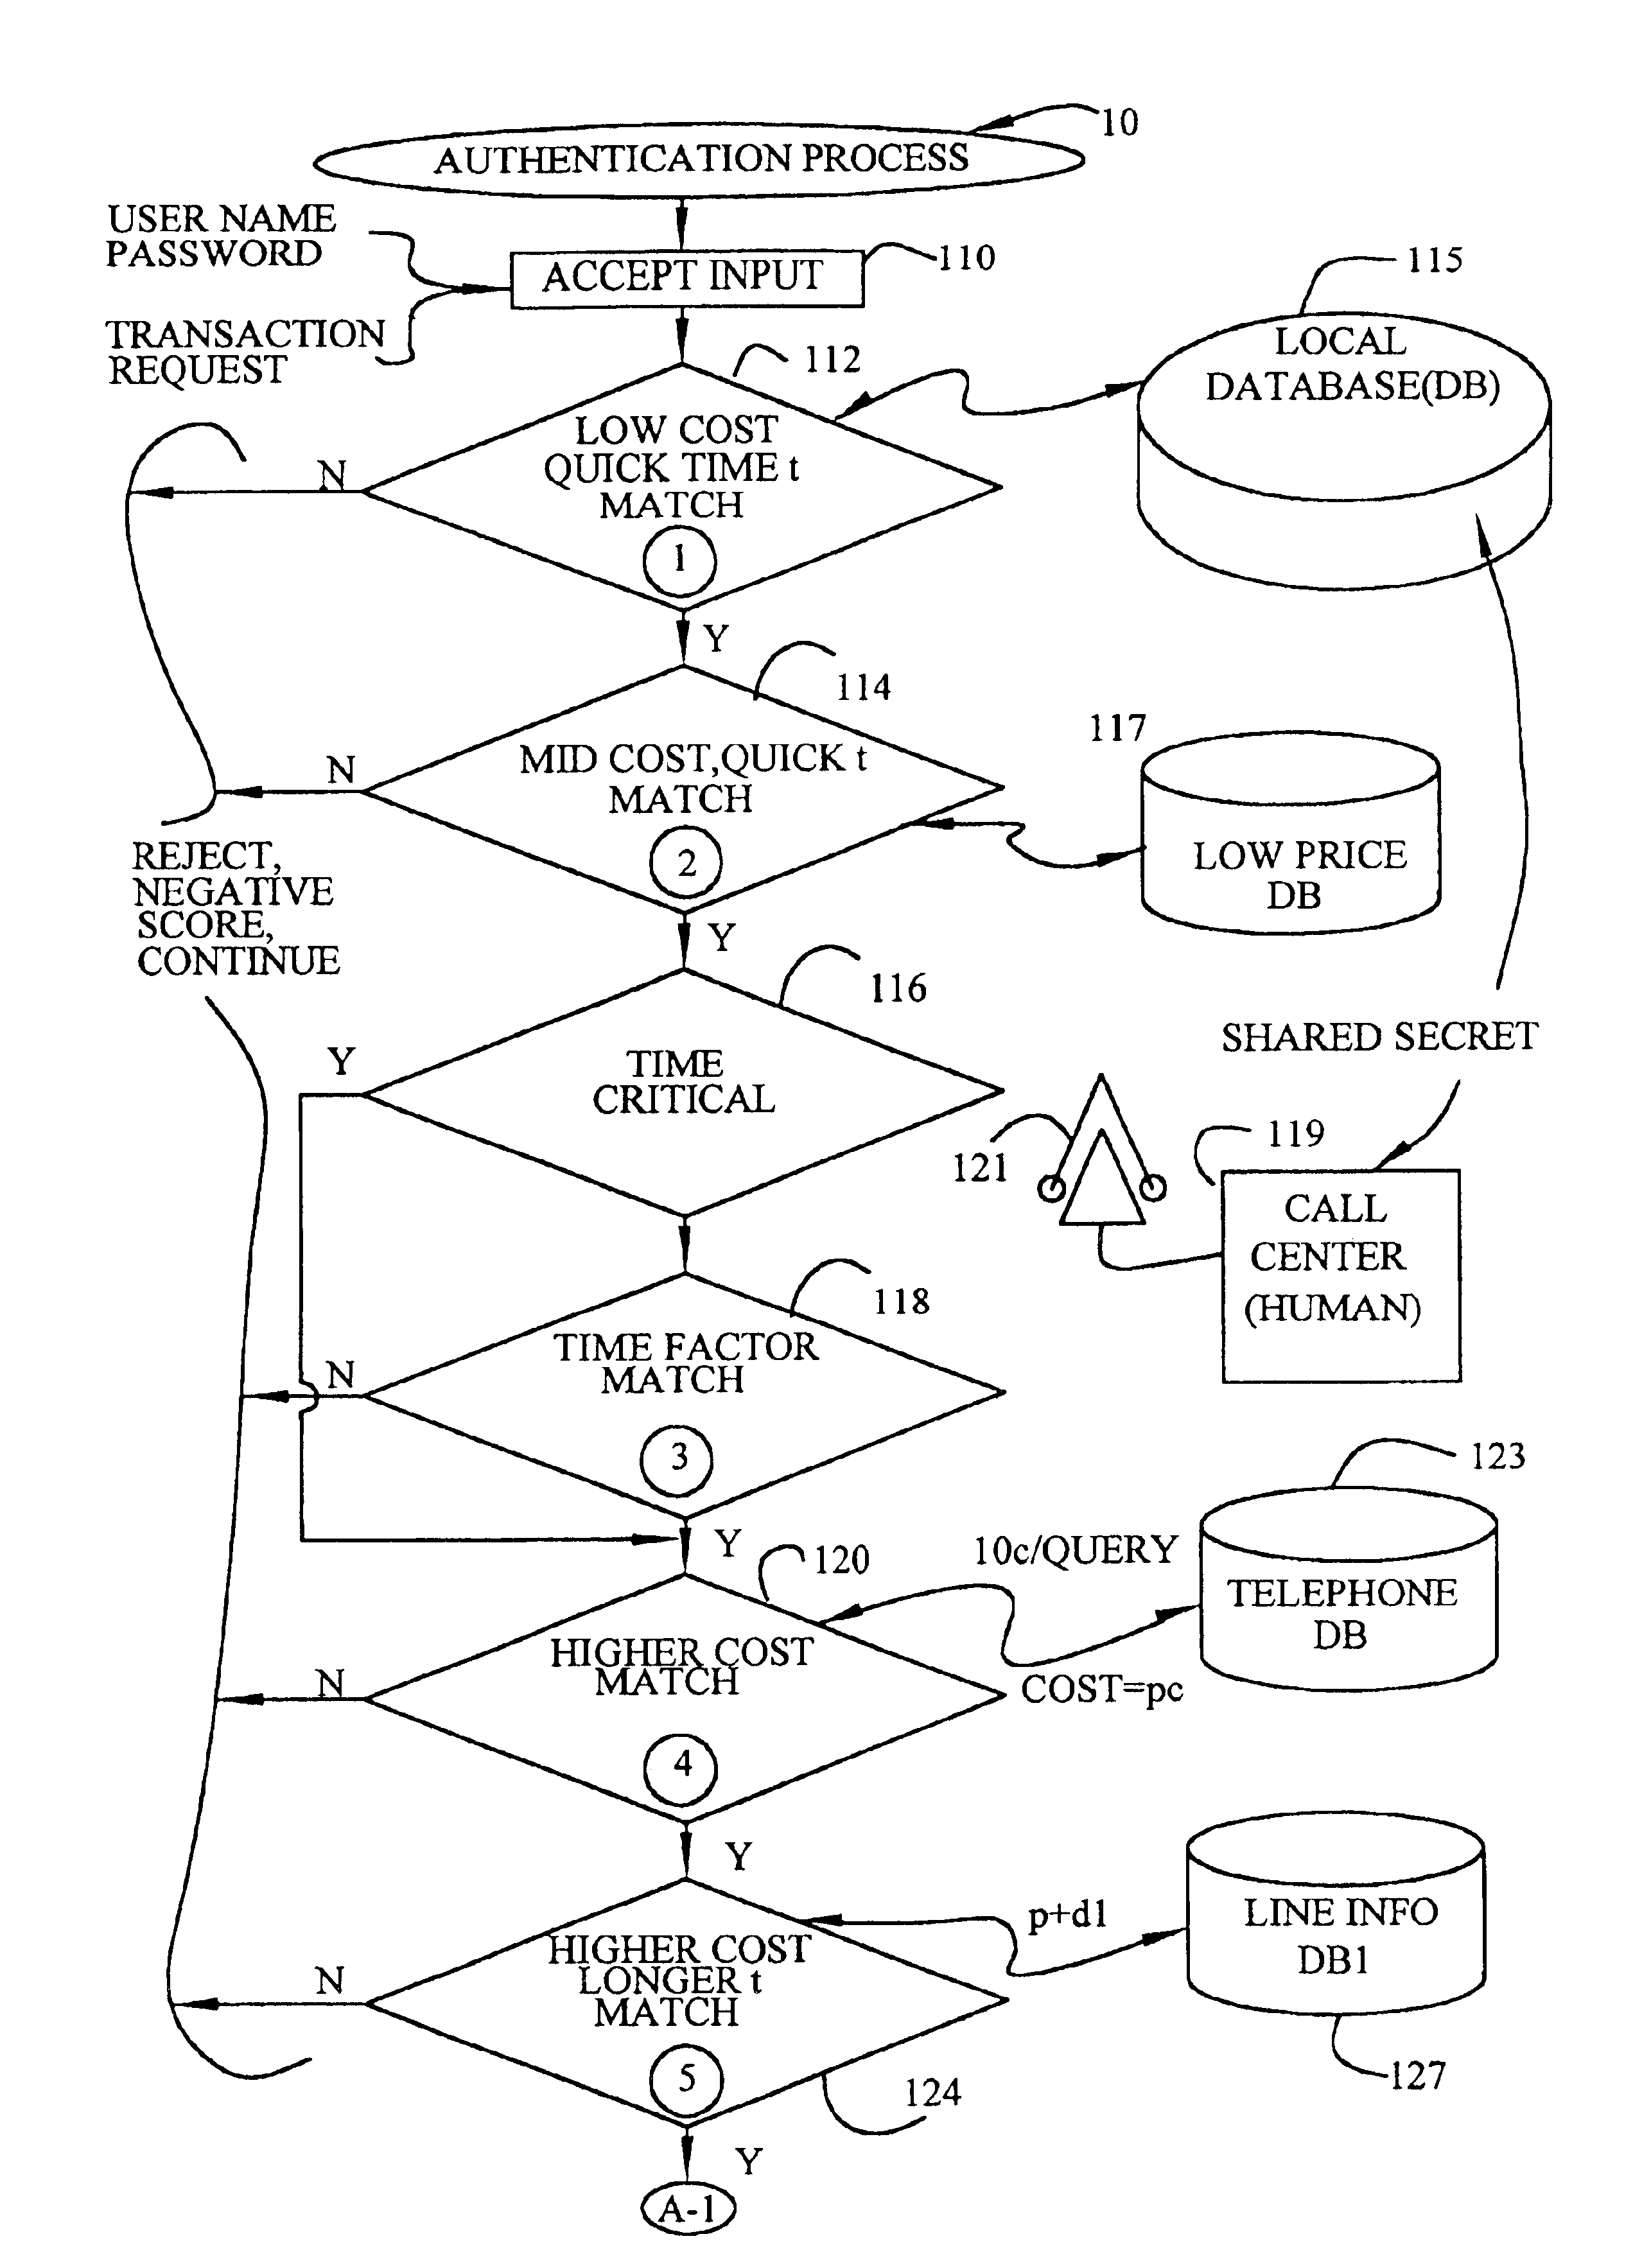 Hierarchical authentication process and system for financial transactions